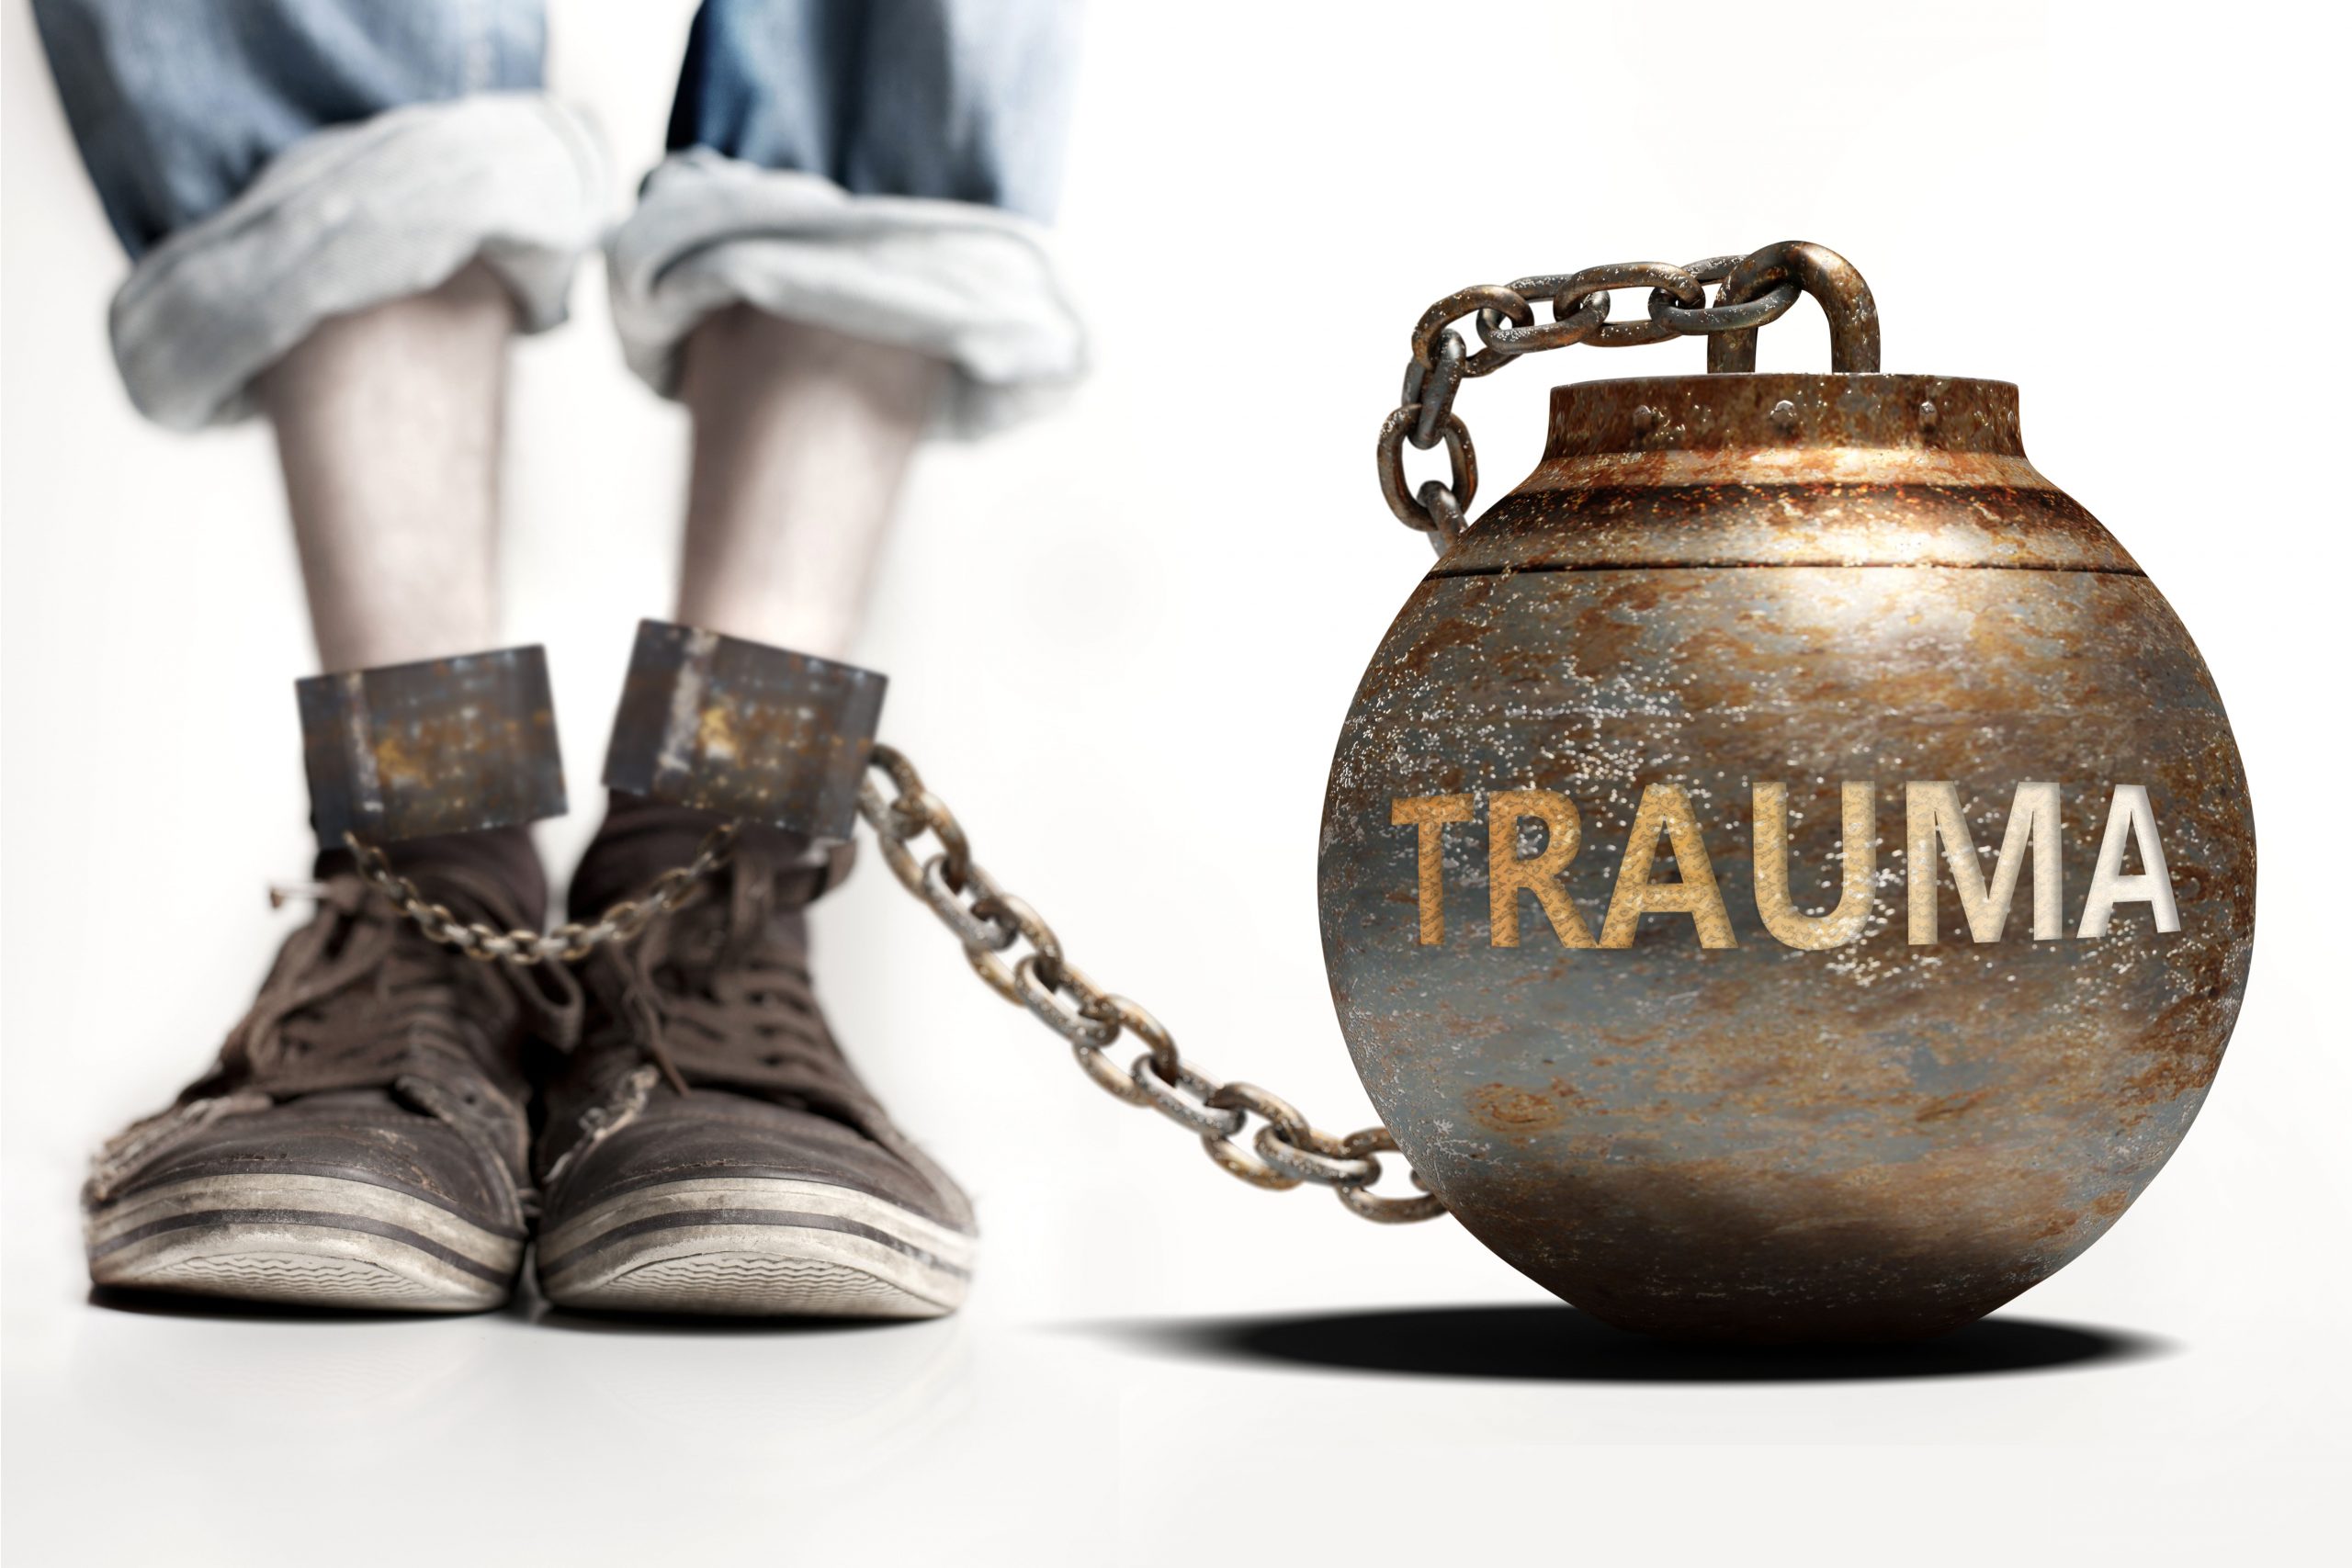 Iron Ball and chain on mans ankle with the word "Trauma" engraved on ball - Trauma and addiction concept images